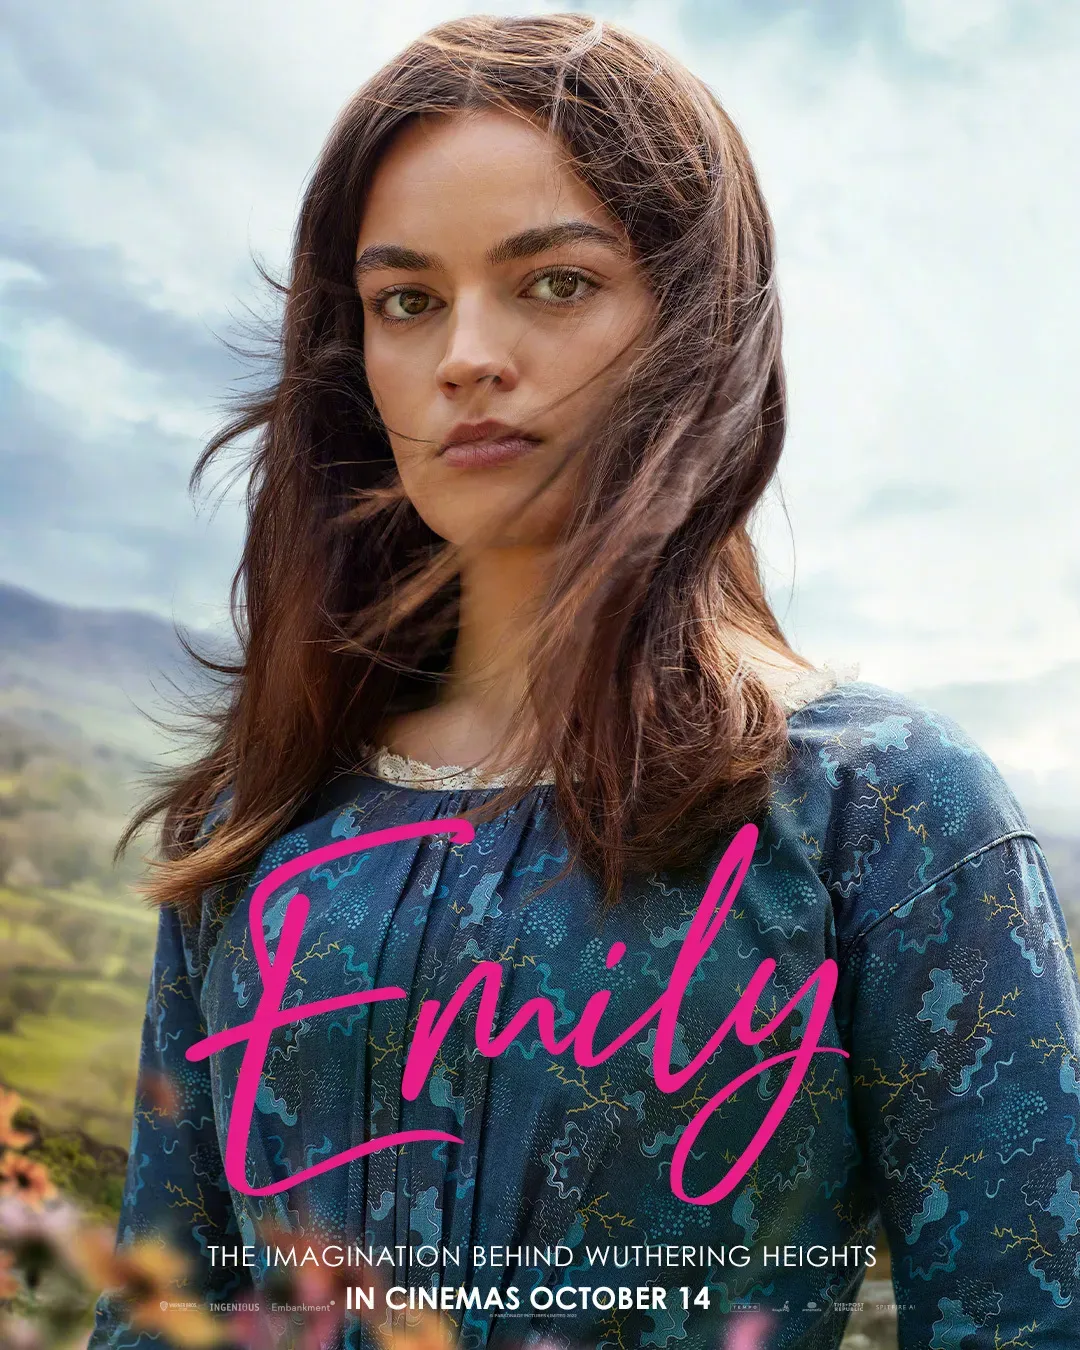 Emily Bronte biopic 'Emily‎' releases official trailer and poster, hits UK theaters 14 October | FMV6